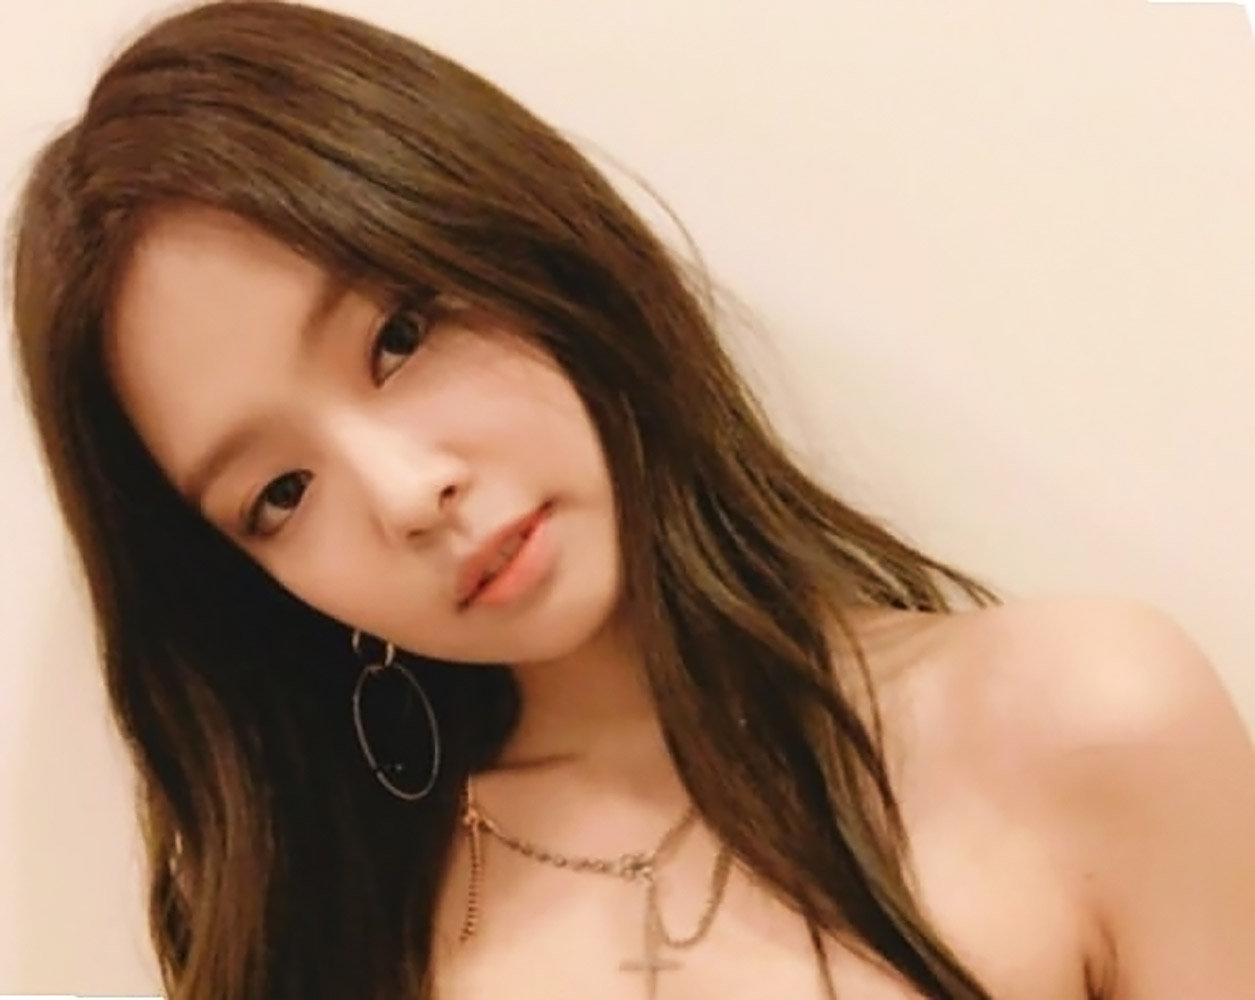 Jennie, Jisoo, and Rose from the South Korean female group Blackpink nude o...